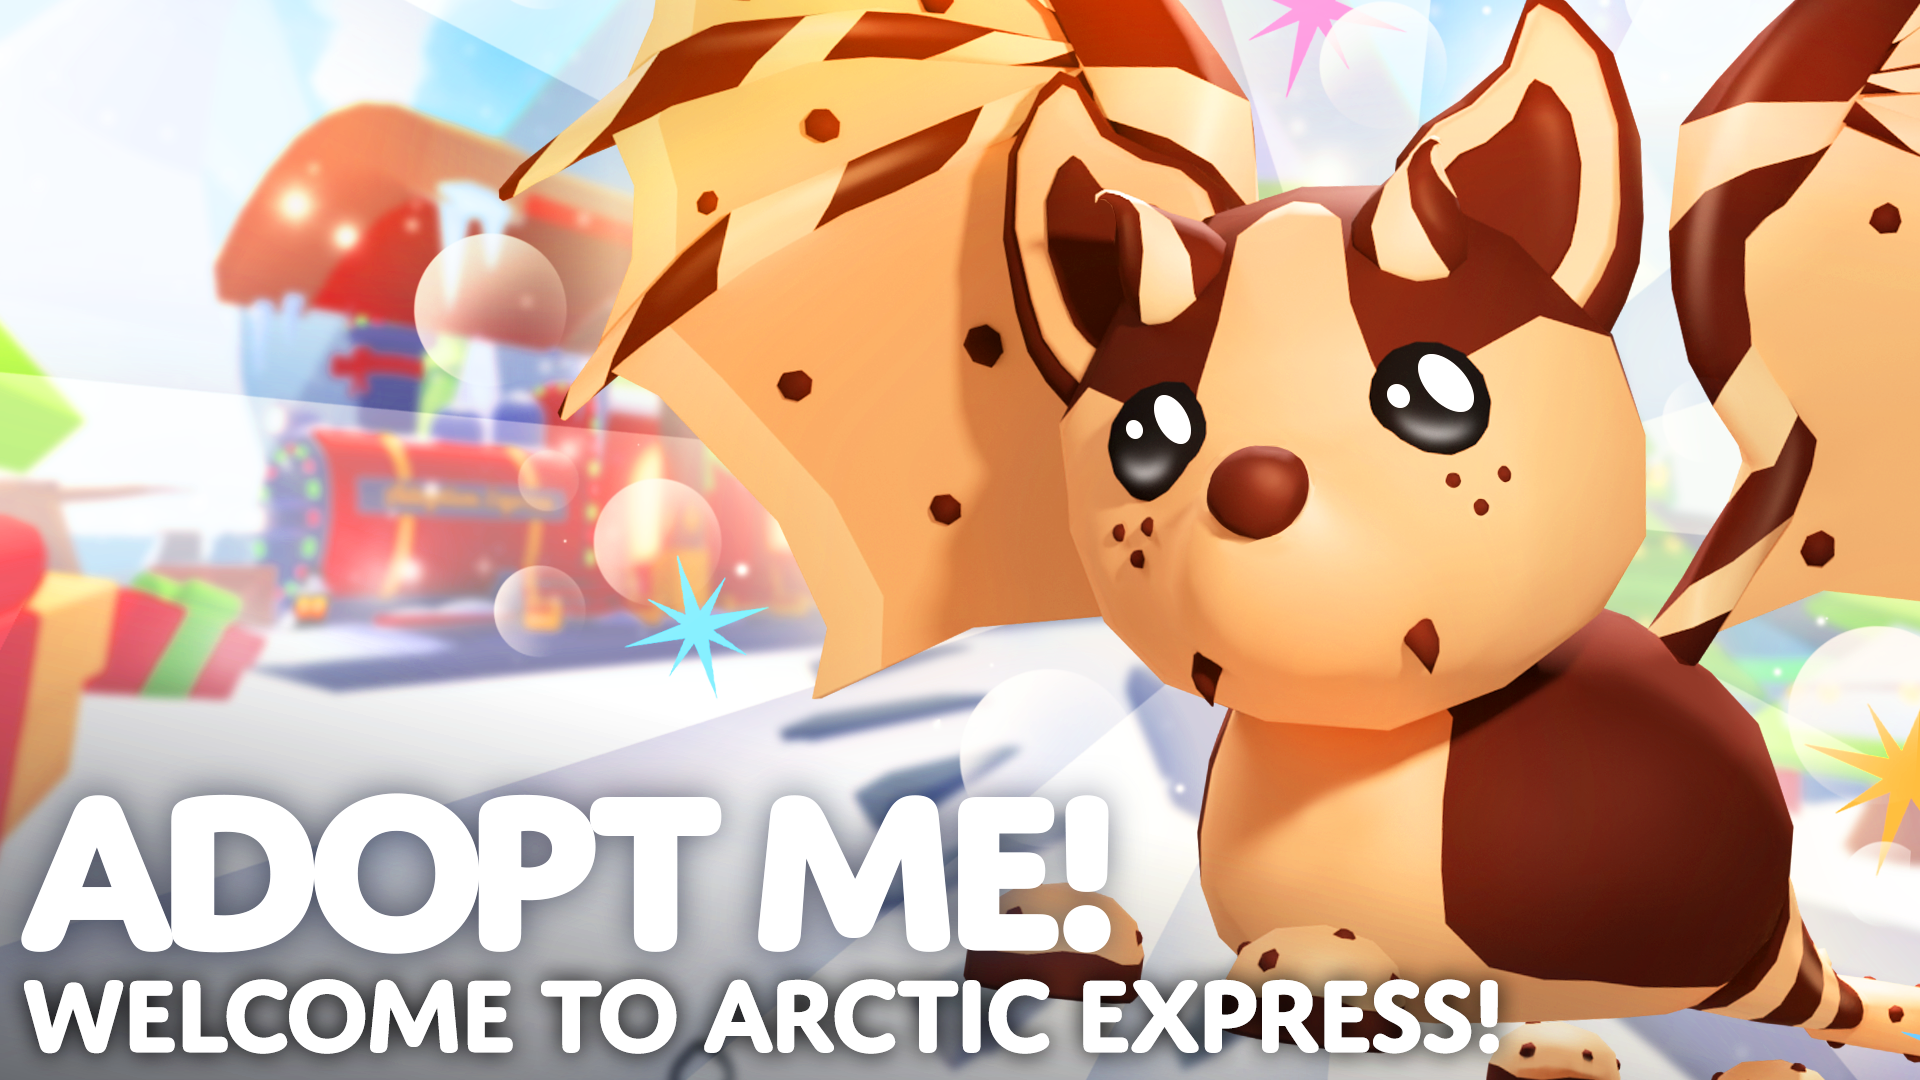 Chocolate Chip Bat Dragon welcomes you to the Arctic Express! 